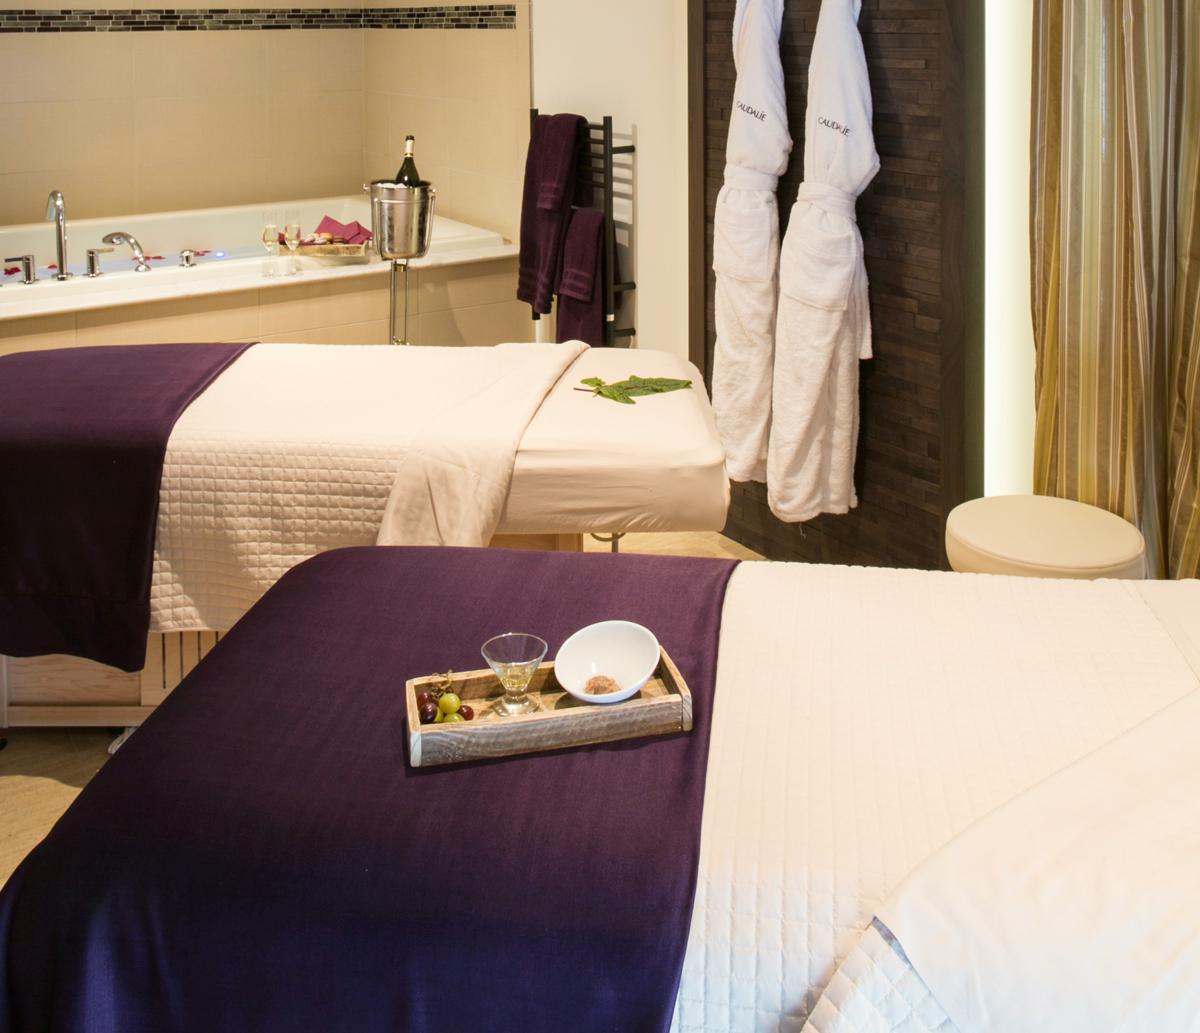 The 5-treatment room spa includes two couples’ rooms which feature chromatherapy lighting / The Epicurean Hotel / WTS International